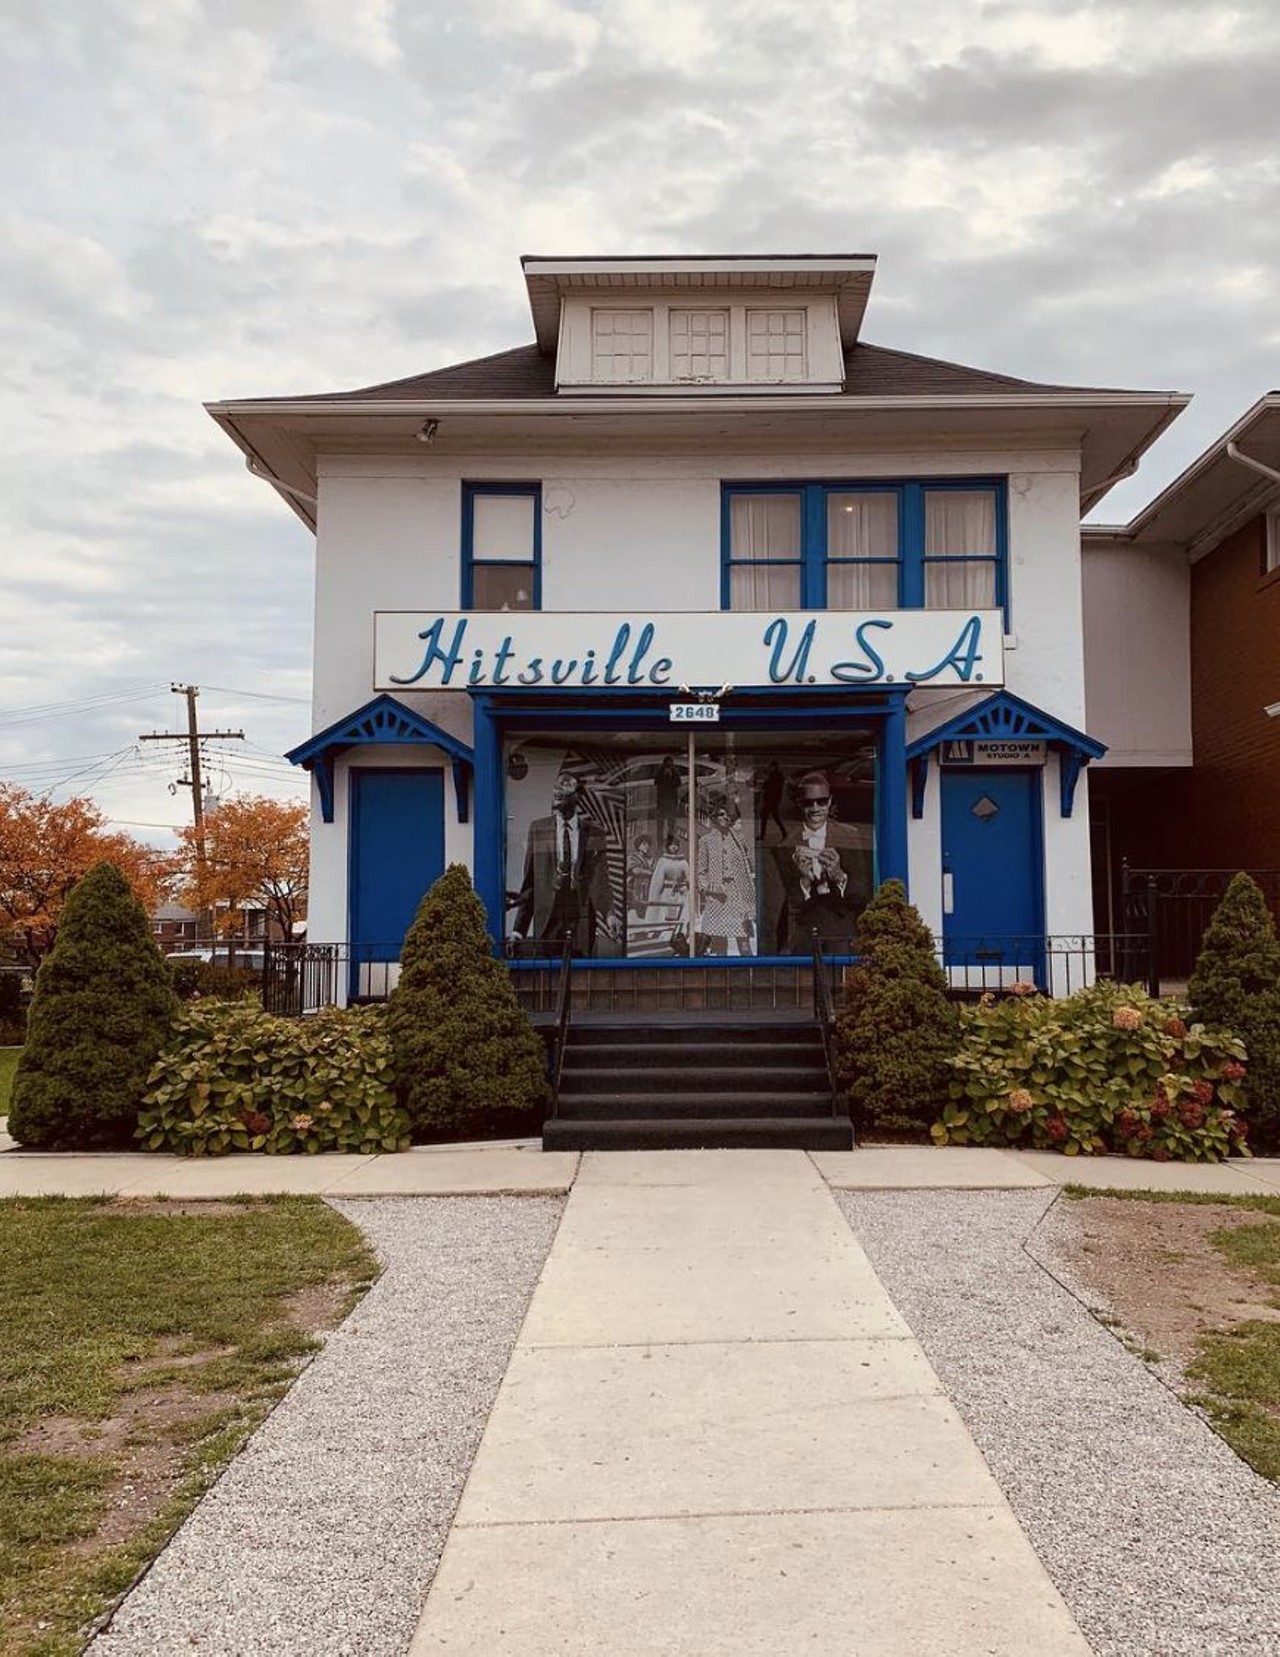 Motown Museum
2648 W Grand Blvd, Detroit, MI 48208
Feel the magic of music history by heading to the Motown Museum. Coined &#147;Hitsville U.S.A,&#148; this museum is your destination for the Motown sound.
Photo courtesy of @peterkruder